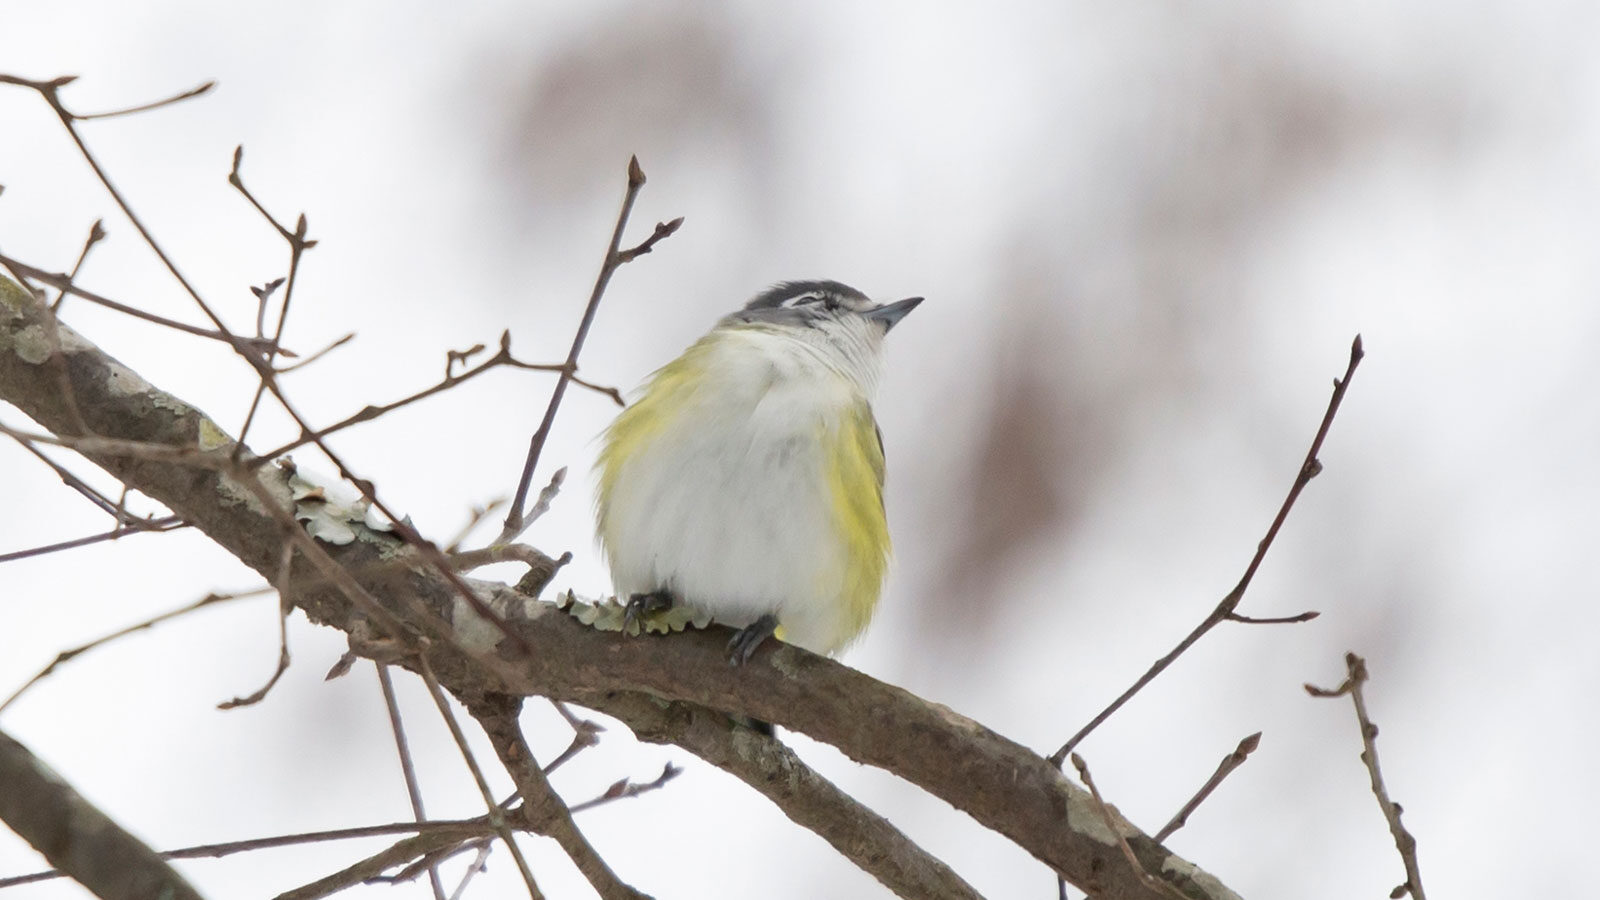 Blue-headed vireo perched on a branch